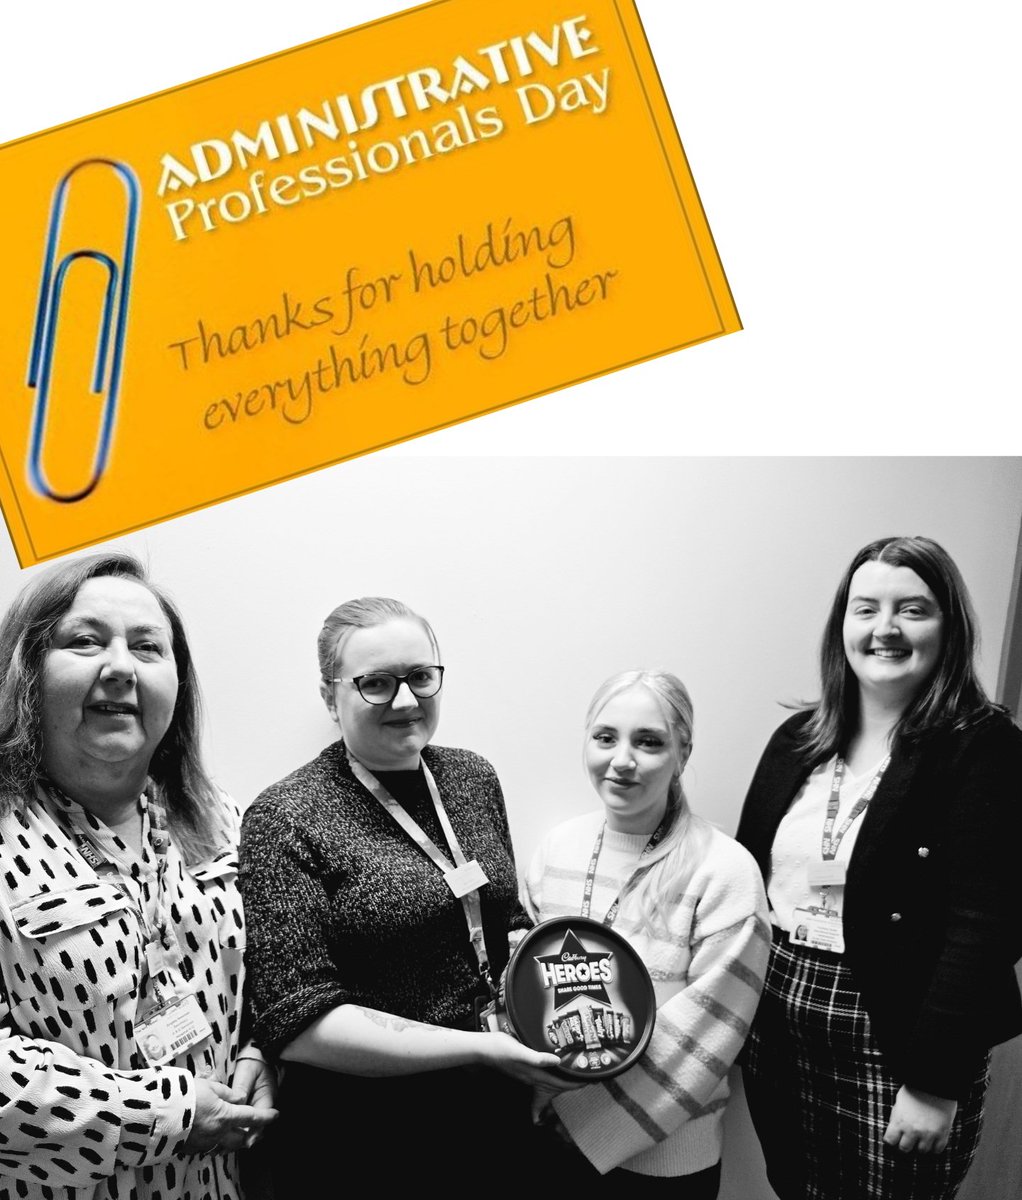 Celebrating our divisional admin team today on #administrativeprofessionalsday 🙌

Thanks for holding everything together @myttacd!

#NHS #AcuteCare #MidYorks